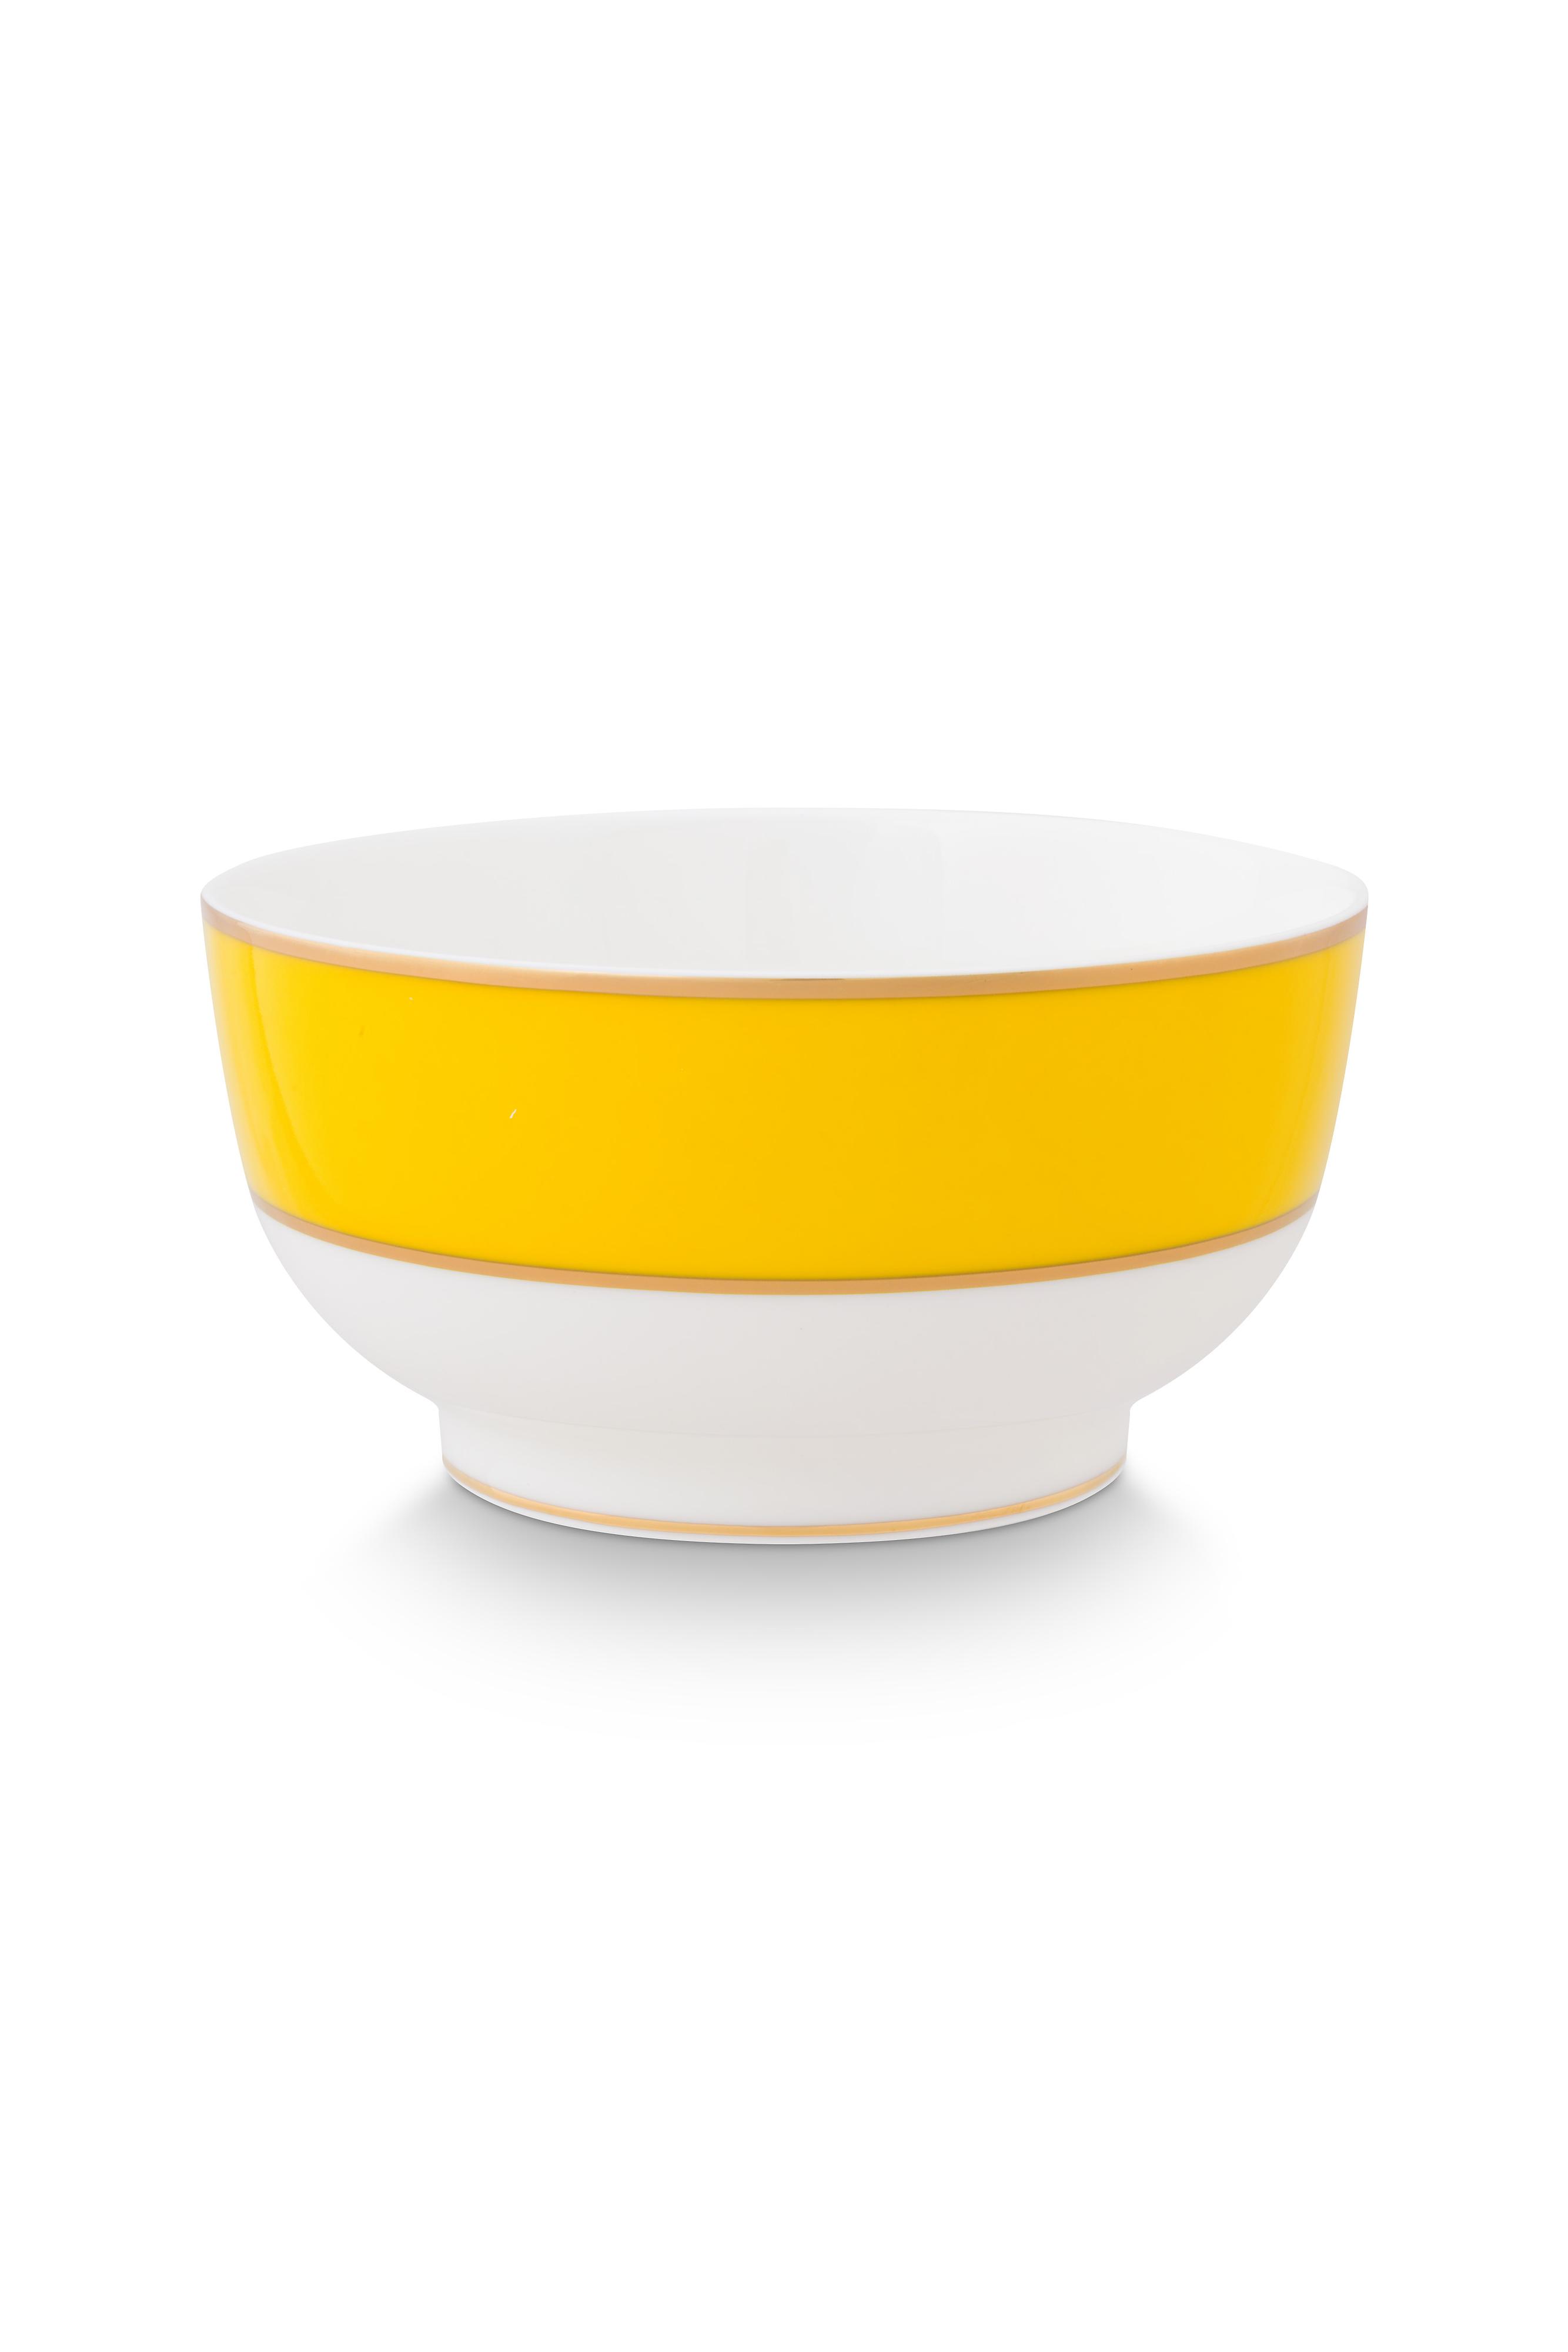 Bowl Pip Chique Gold-yellow 15.5cm Gift